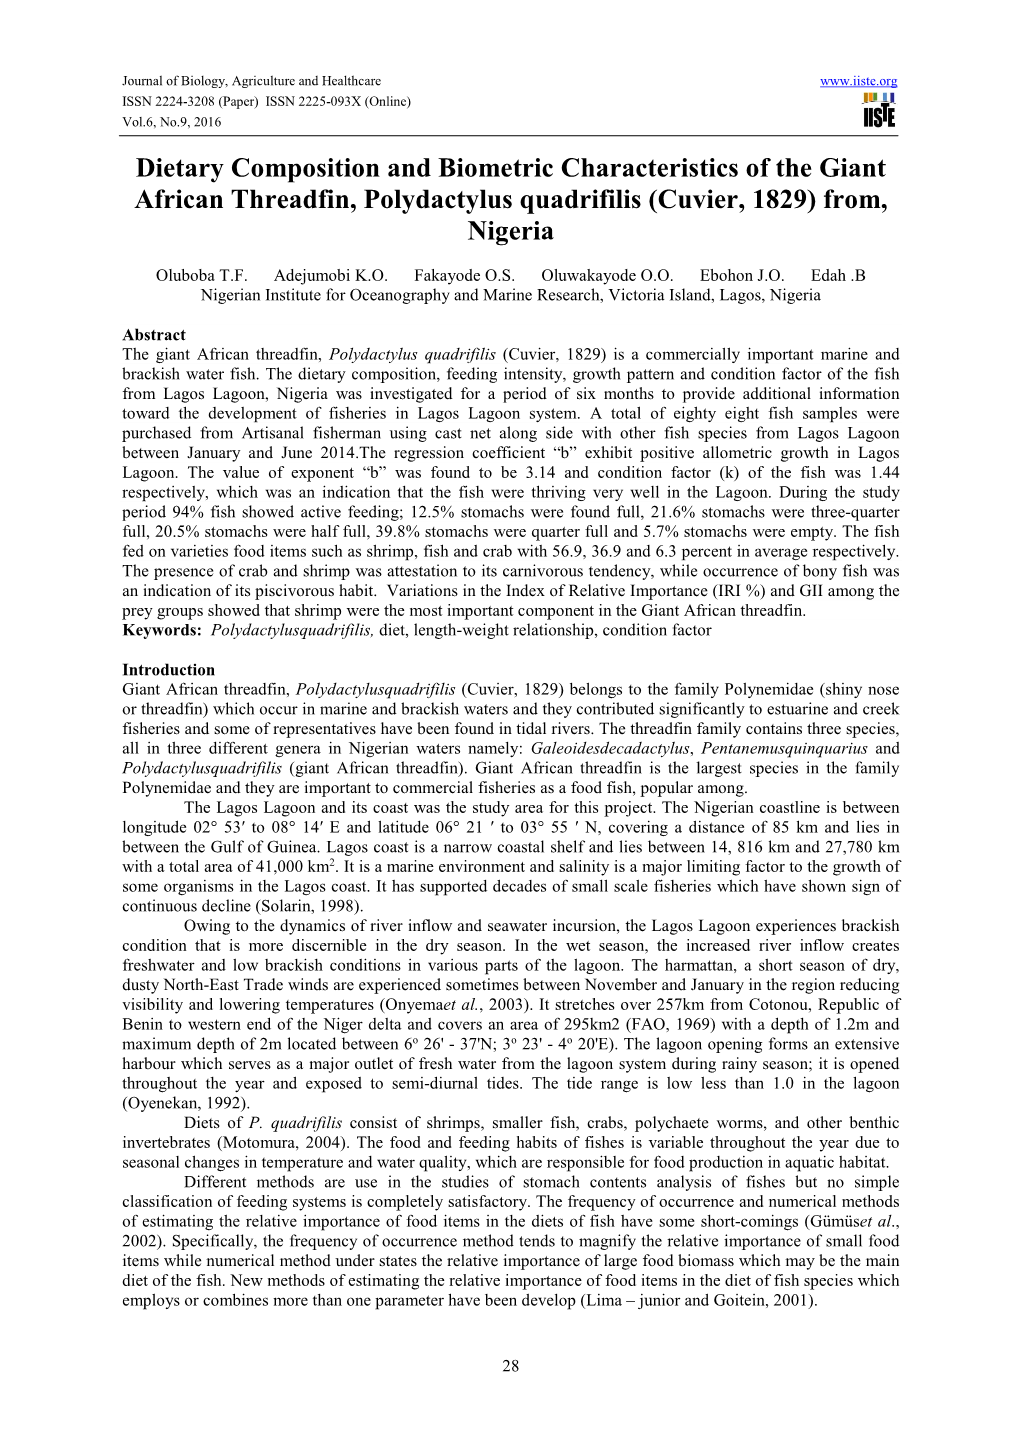 Dietary Composition and Biometric Characteristics of the Giant African Threadfin, Polydactylus Quadrifilis (Cuvier, 1829) From, Nigeria